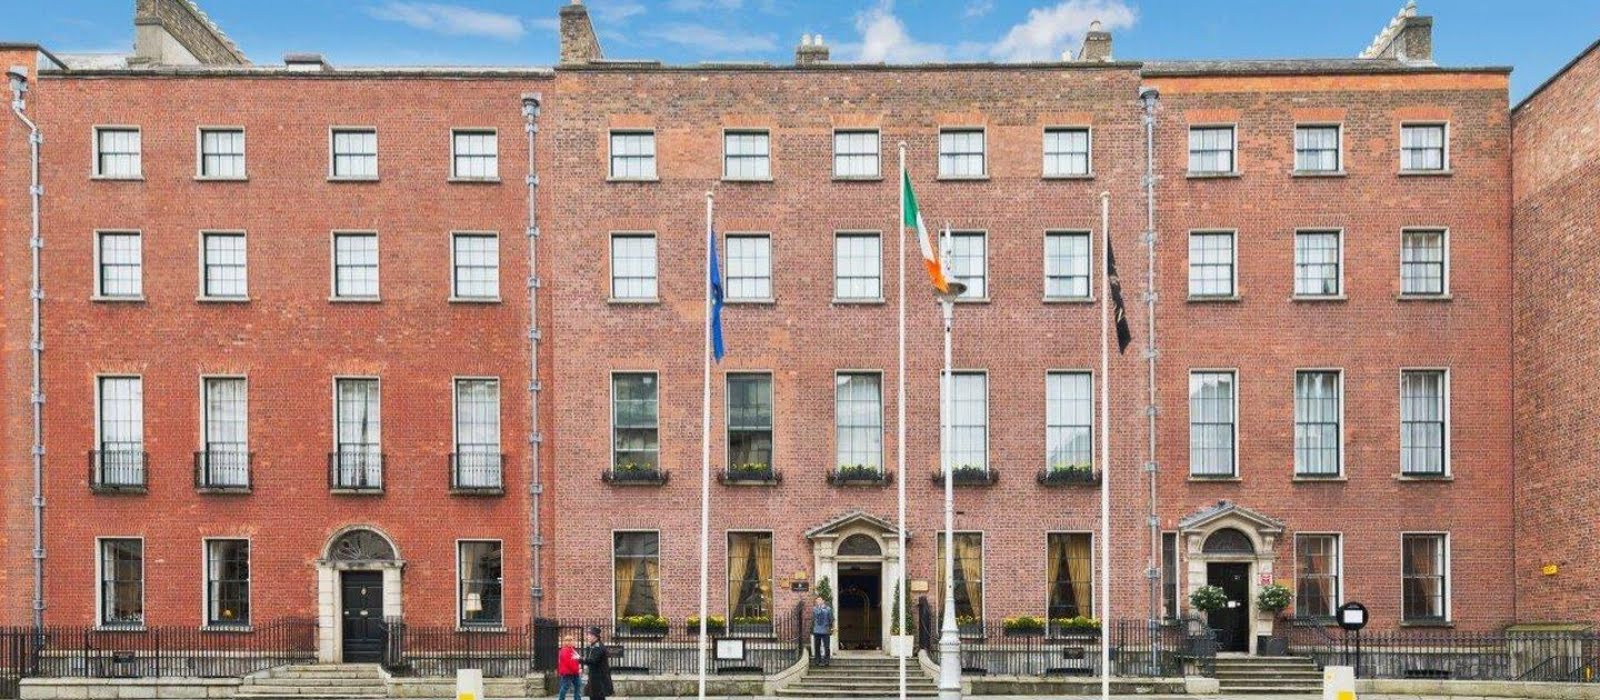 You can rent a room in The Merrion Hotel for a cool €7k a month